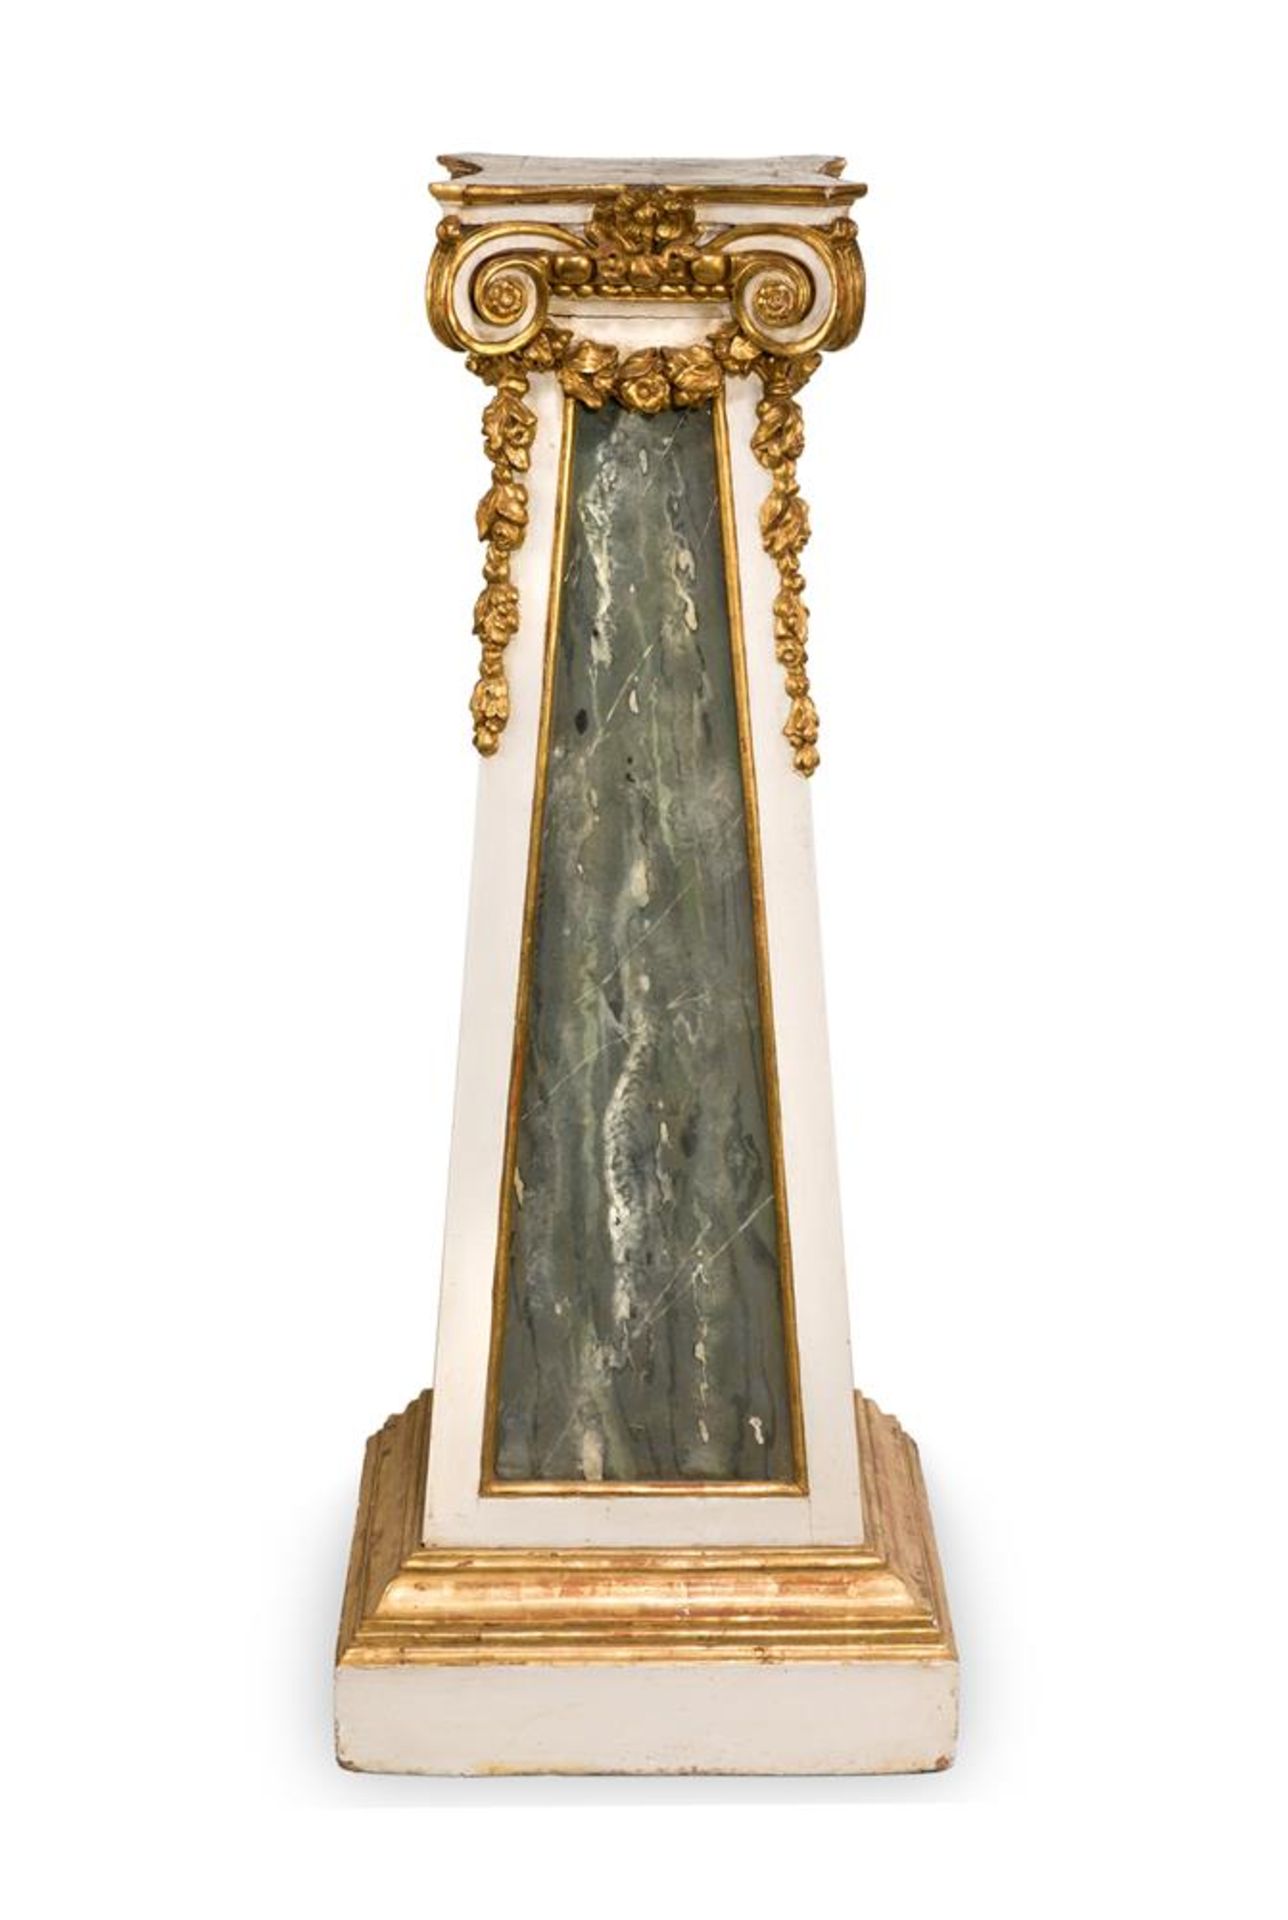 A WHITE PAINTED, GILTWOOD AND SIMULATED MARBLE PEDESTAL, 19TH / 20TH CENTURY, NORTH EUROPEAN - Image 2 of 3